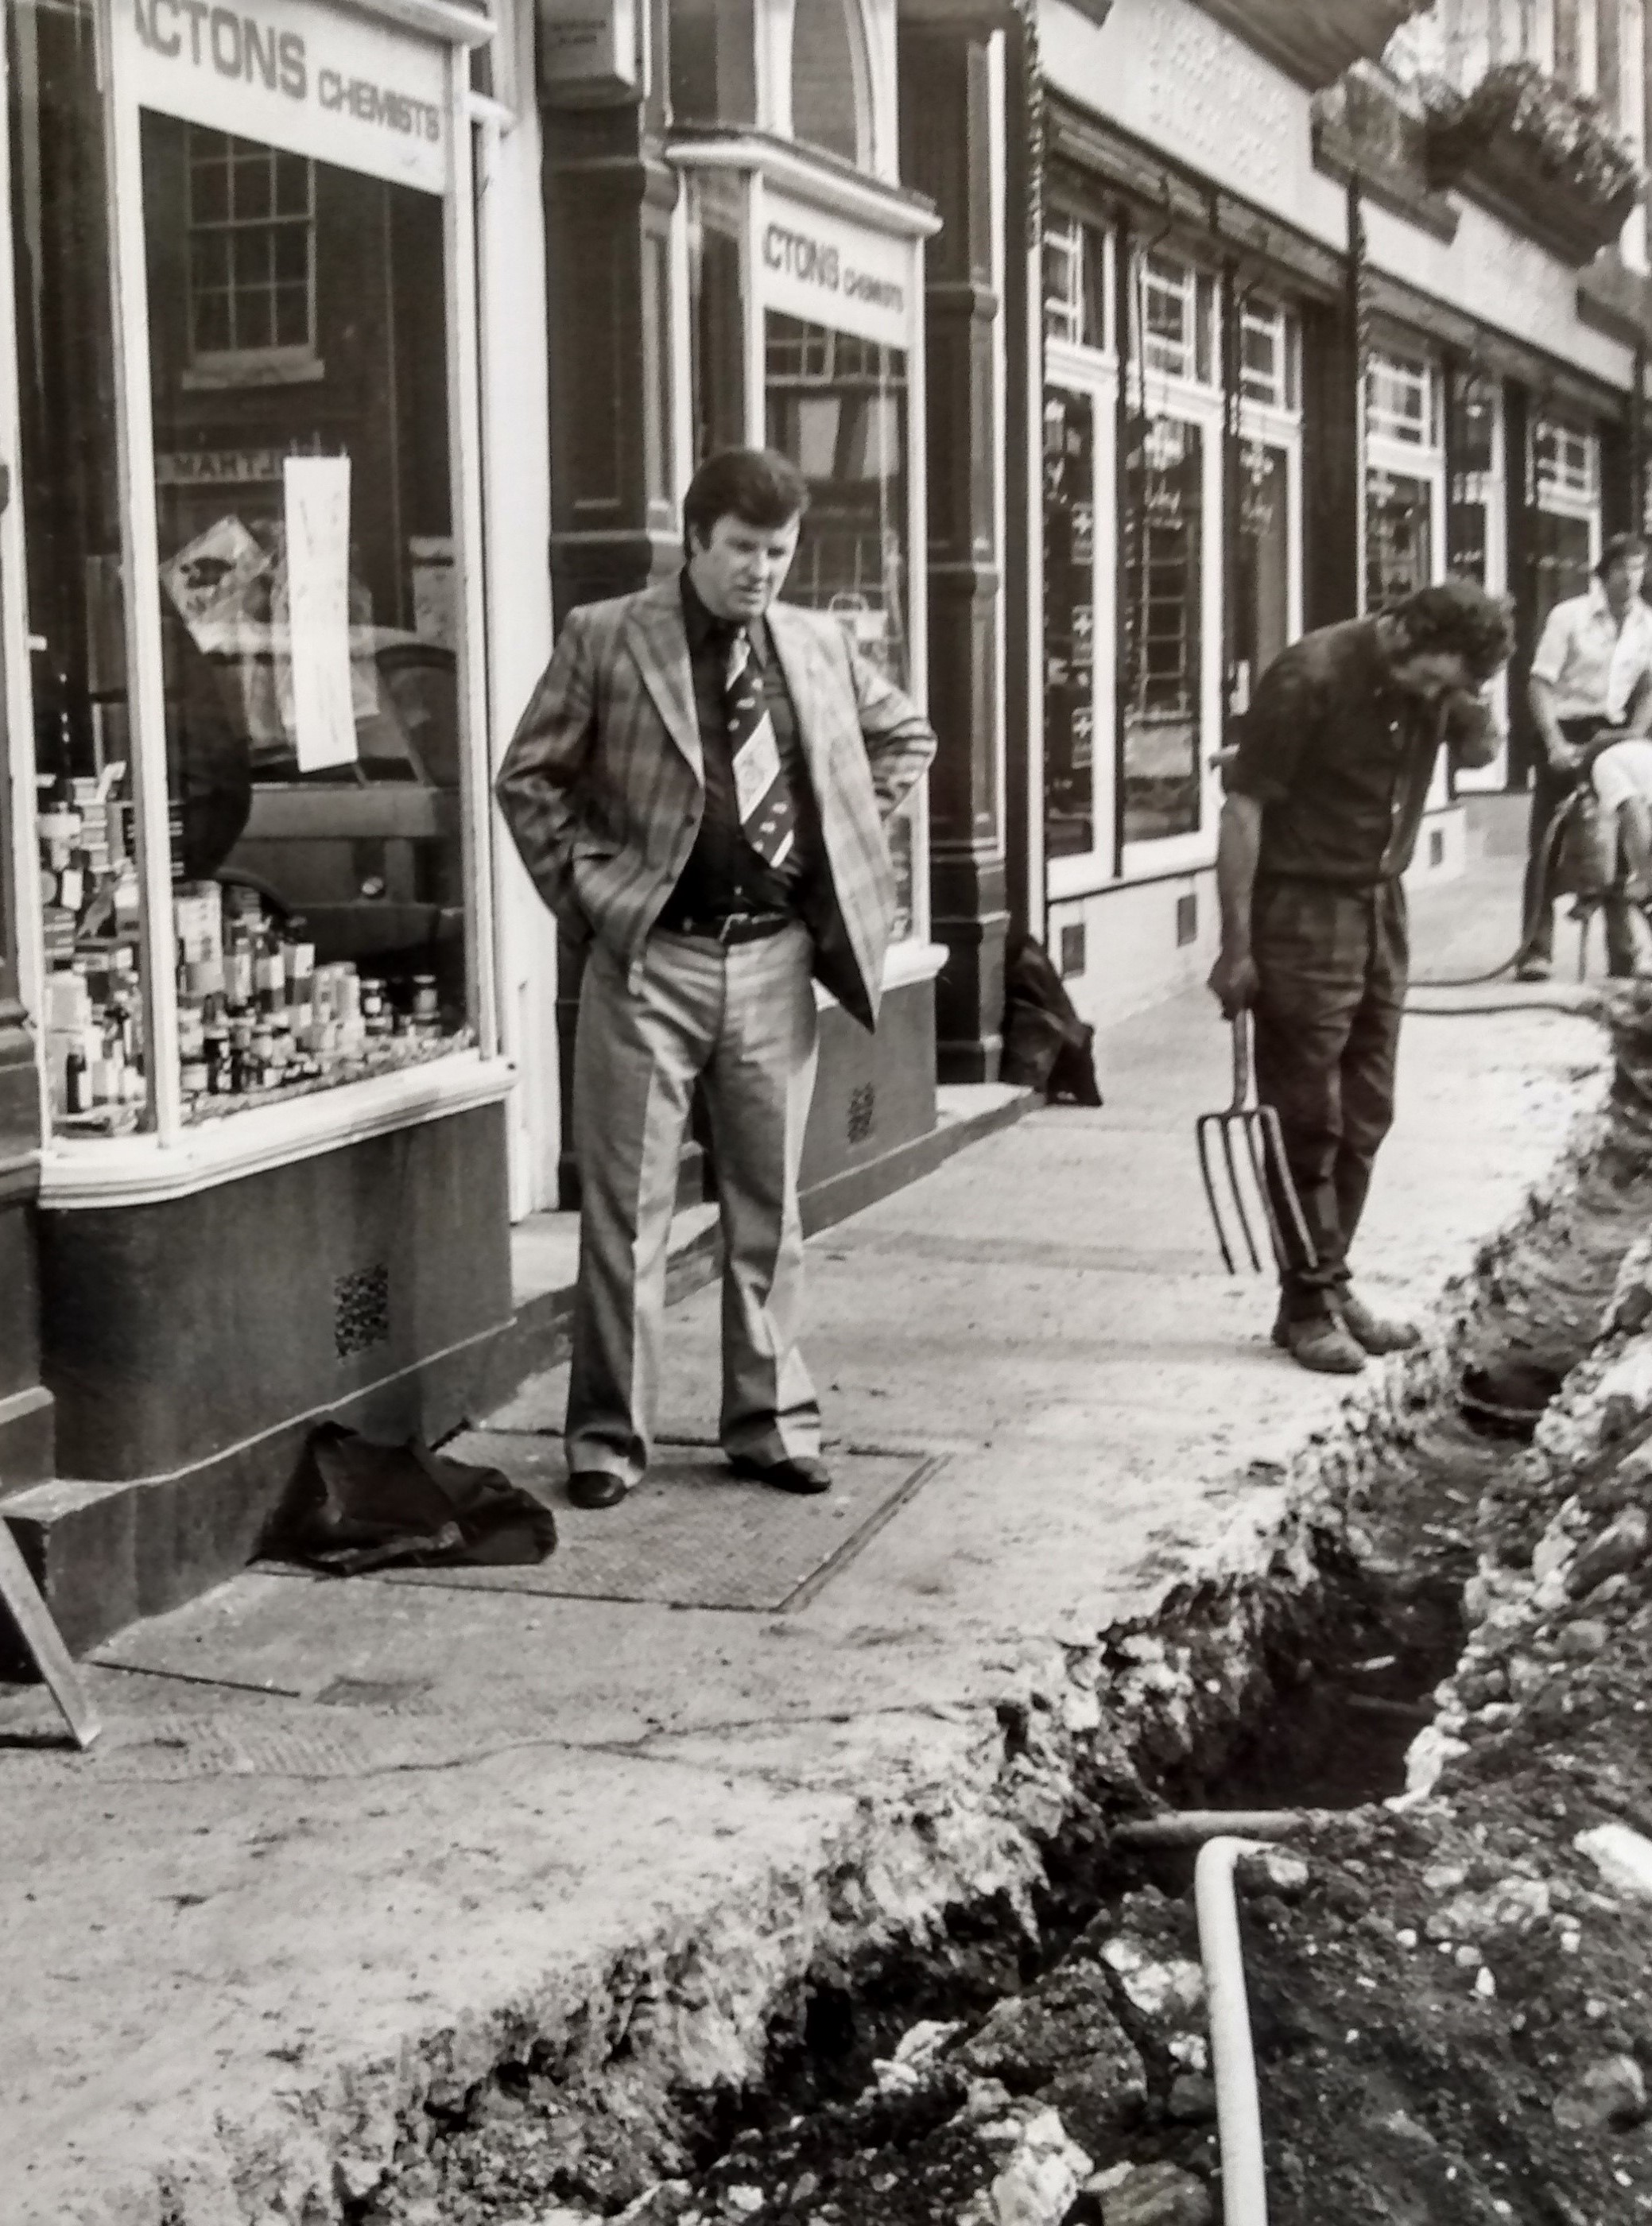 September 1976 and Peter Lewis, owner of Acton’s Chemist looks on in dismay at the work going on outside his shop